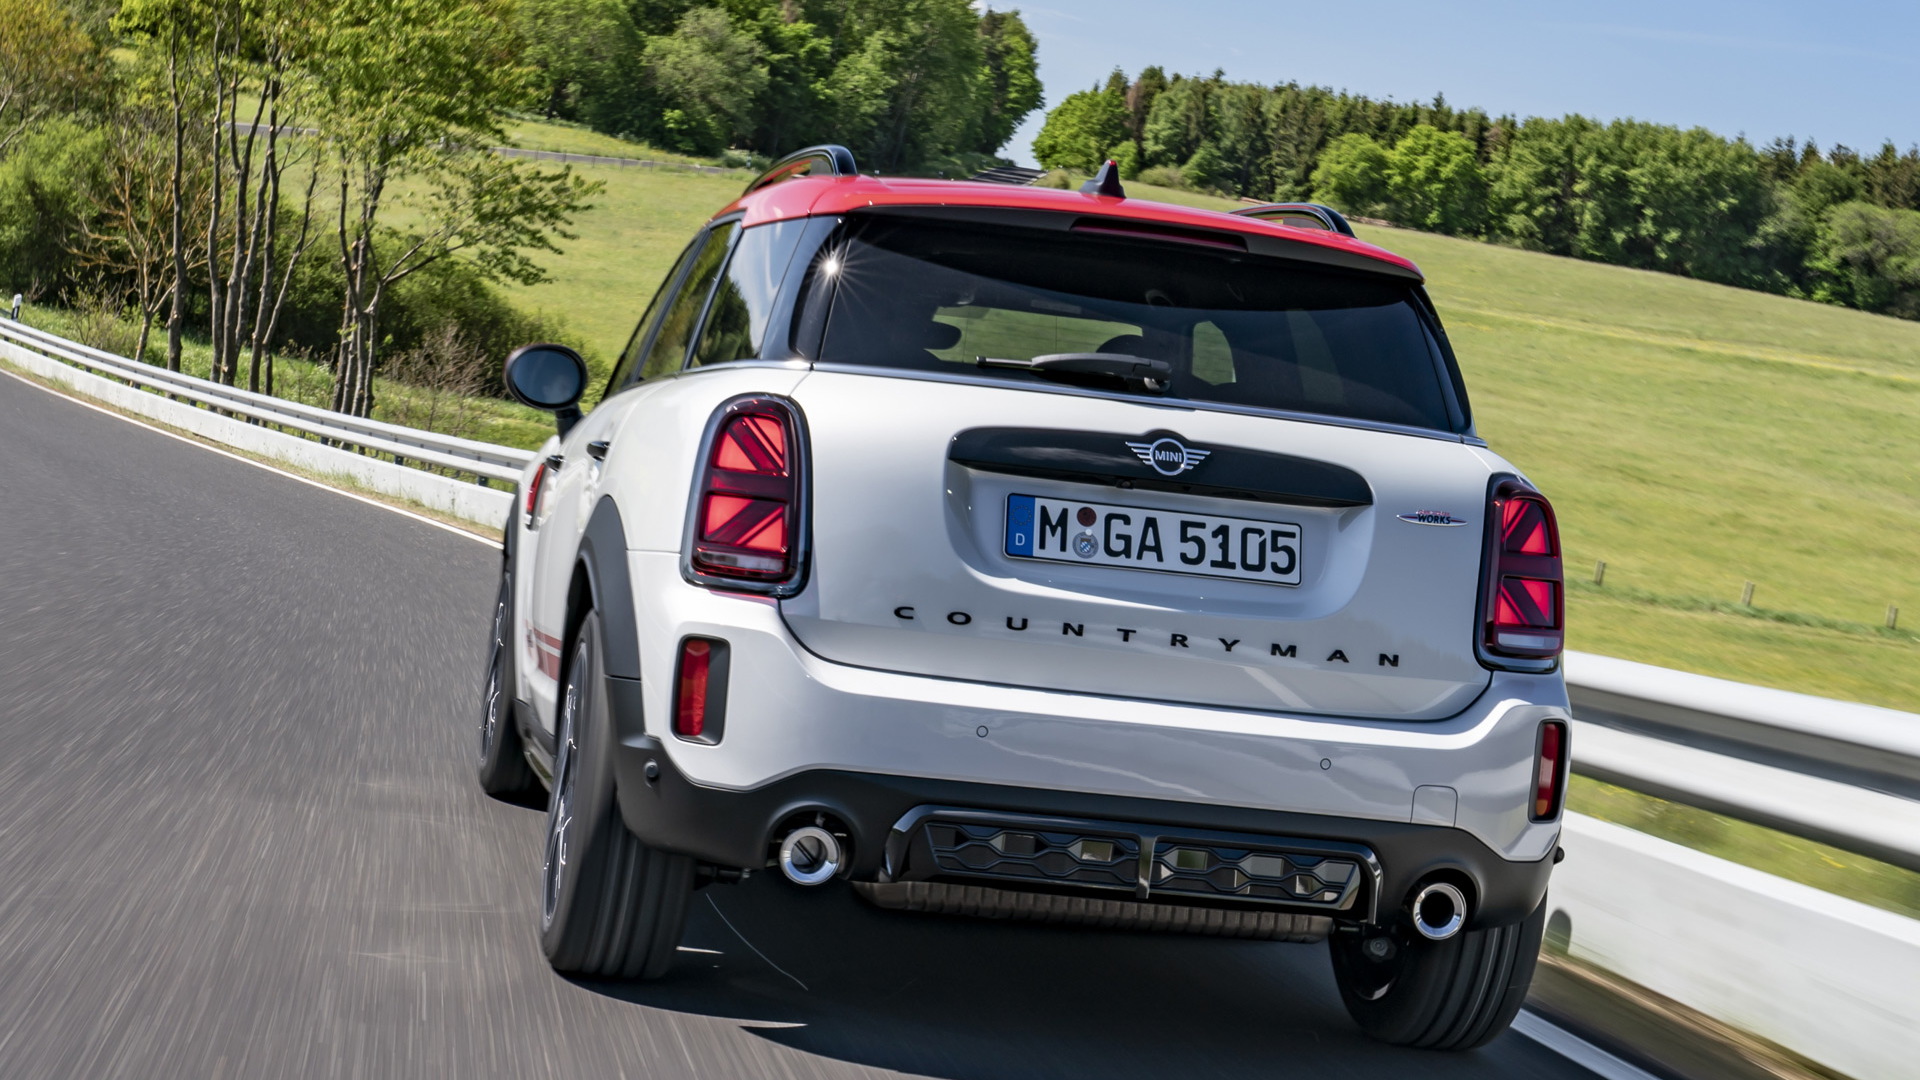 Refreshed Mini JCW Countryman revealed, confirmed for SA launch